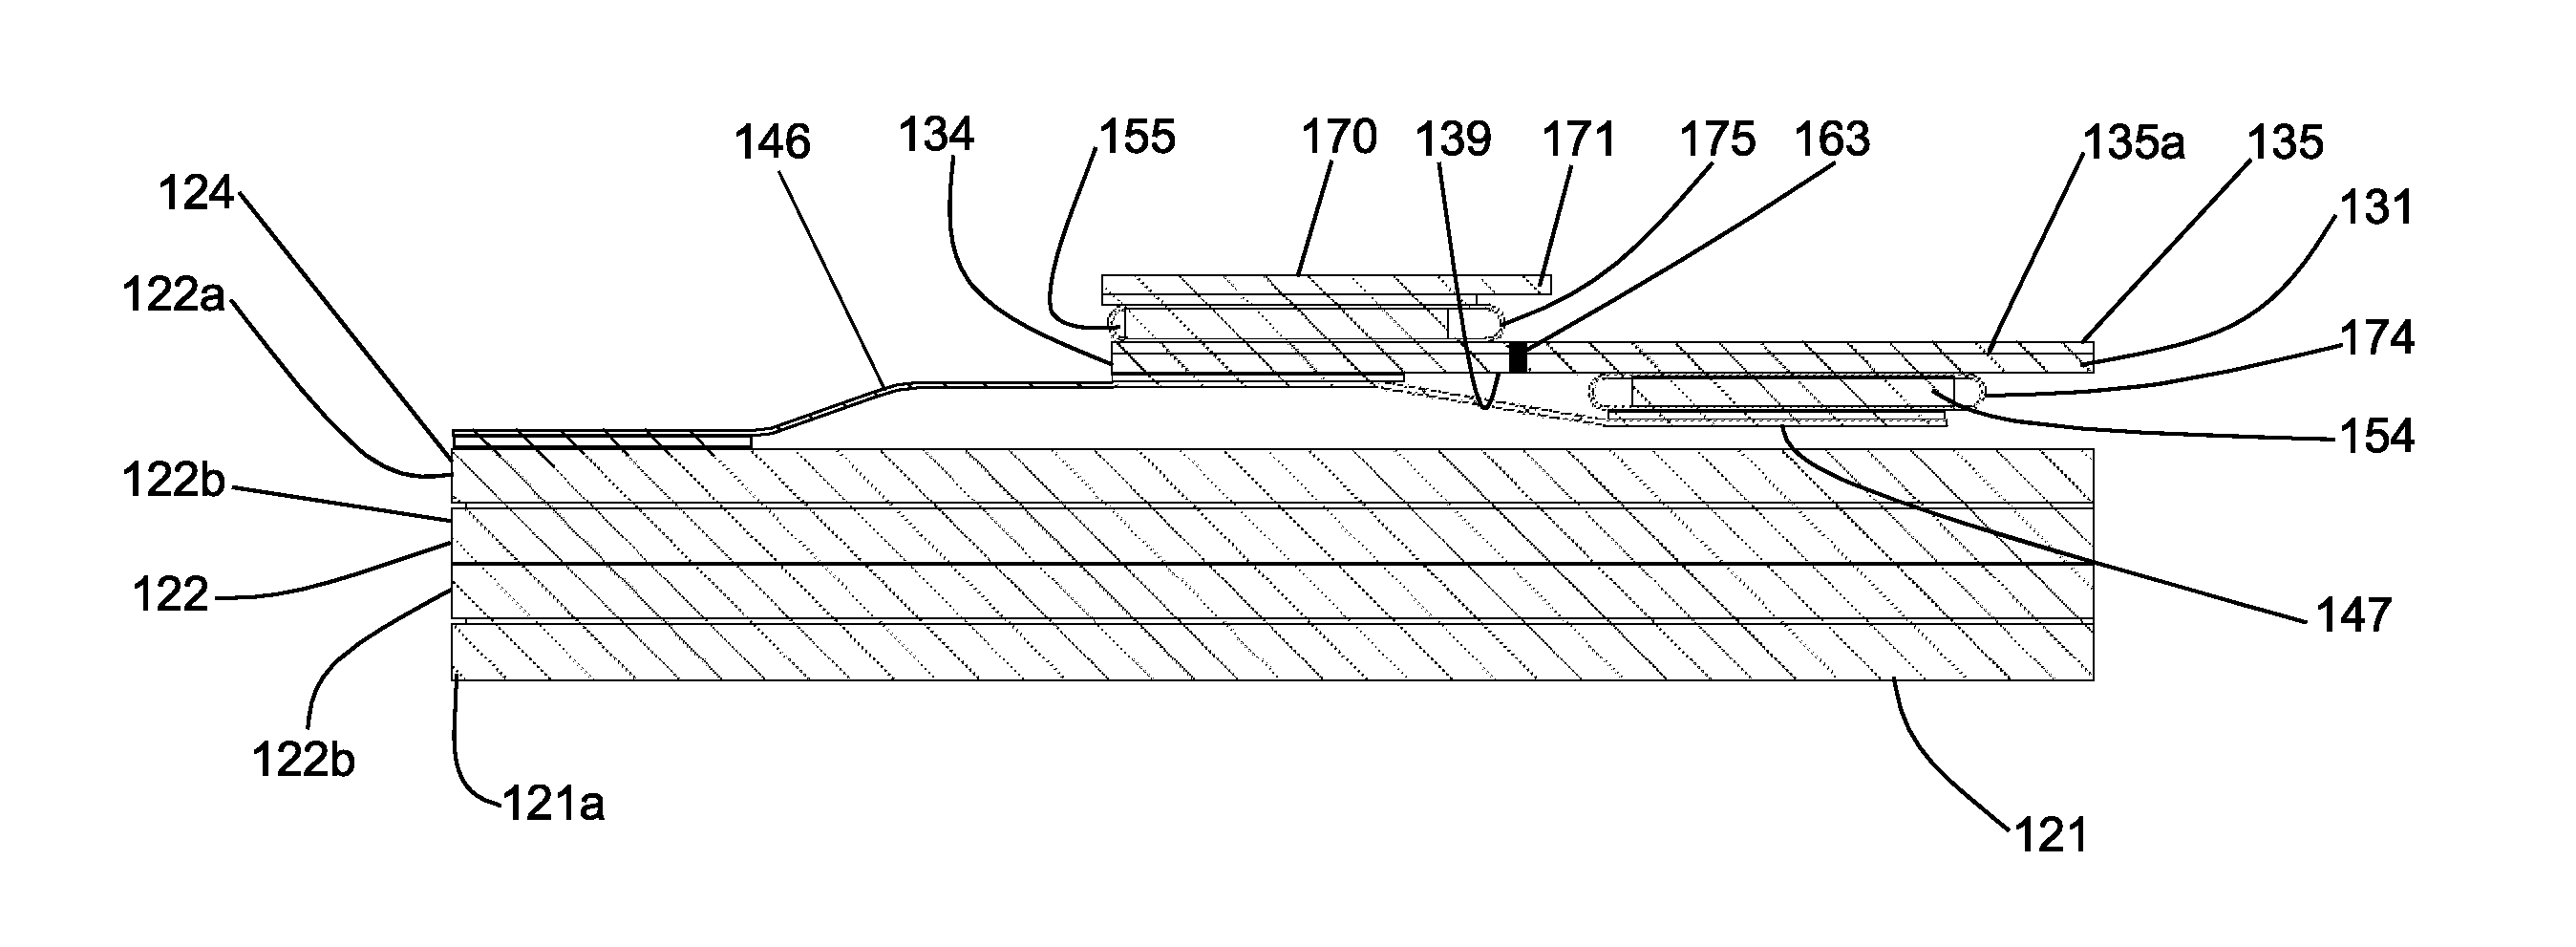 Wound or skin treatment devices with variable edge geometries